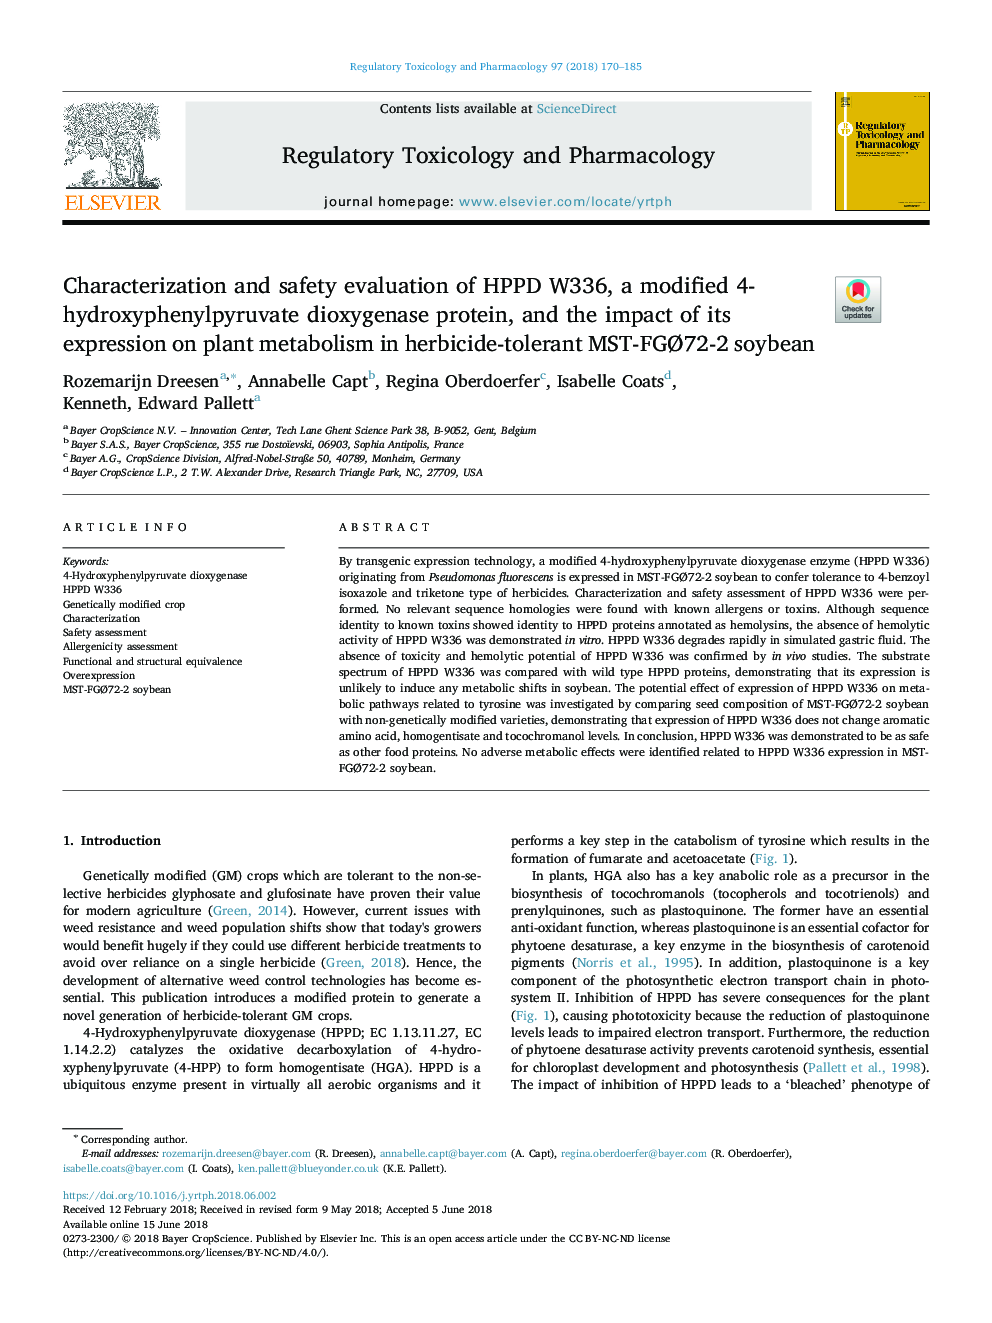 Characterization and safety evaluation of HPPD W336, a modified 4-hydroxyphenylpyruvate dioxygenase protein, and the impact of its expression on plant metabolism in herbicide-tolerant MST-FGÃ72-2 soybean